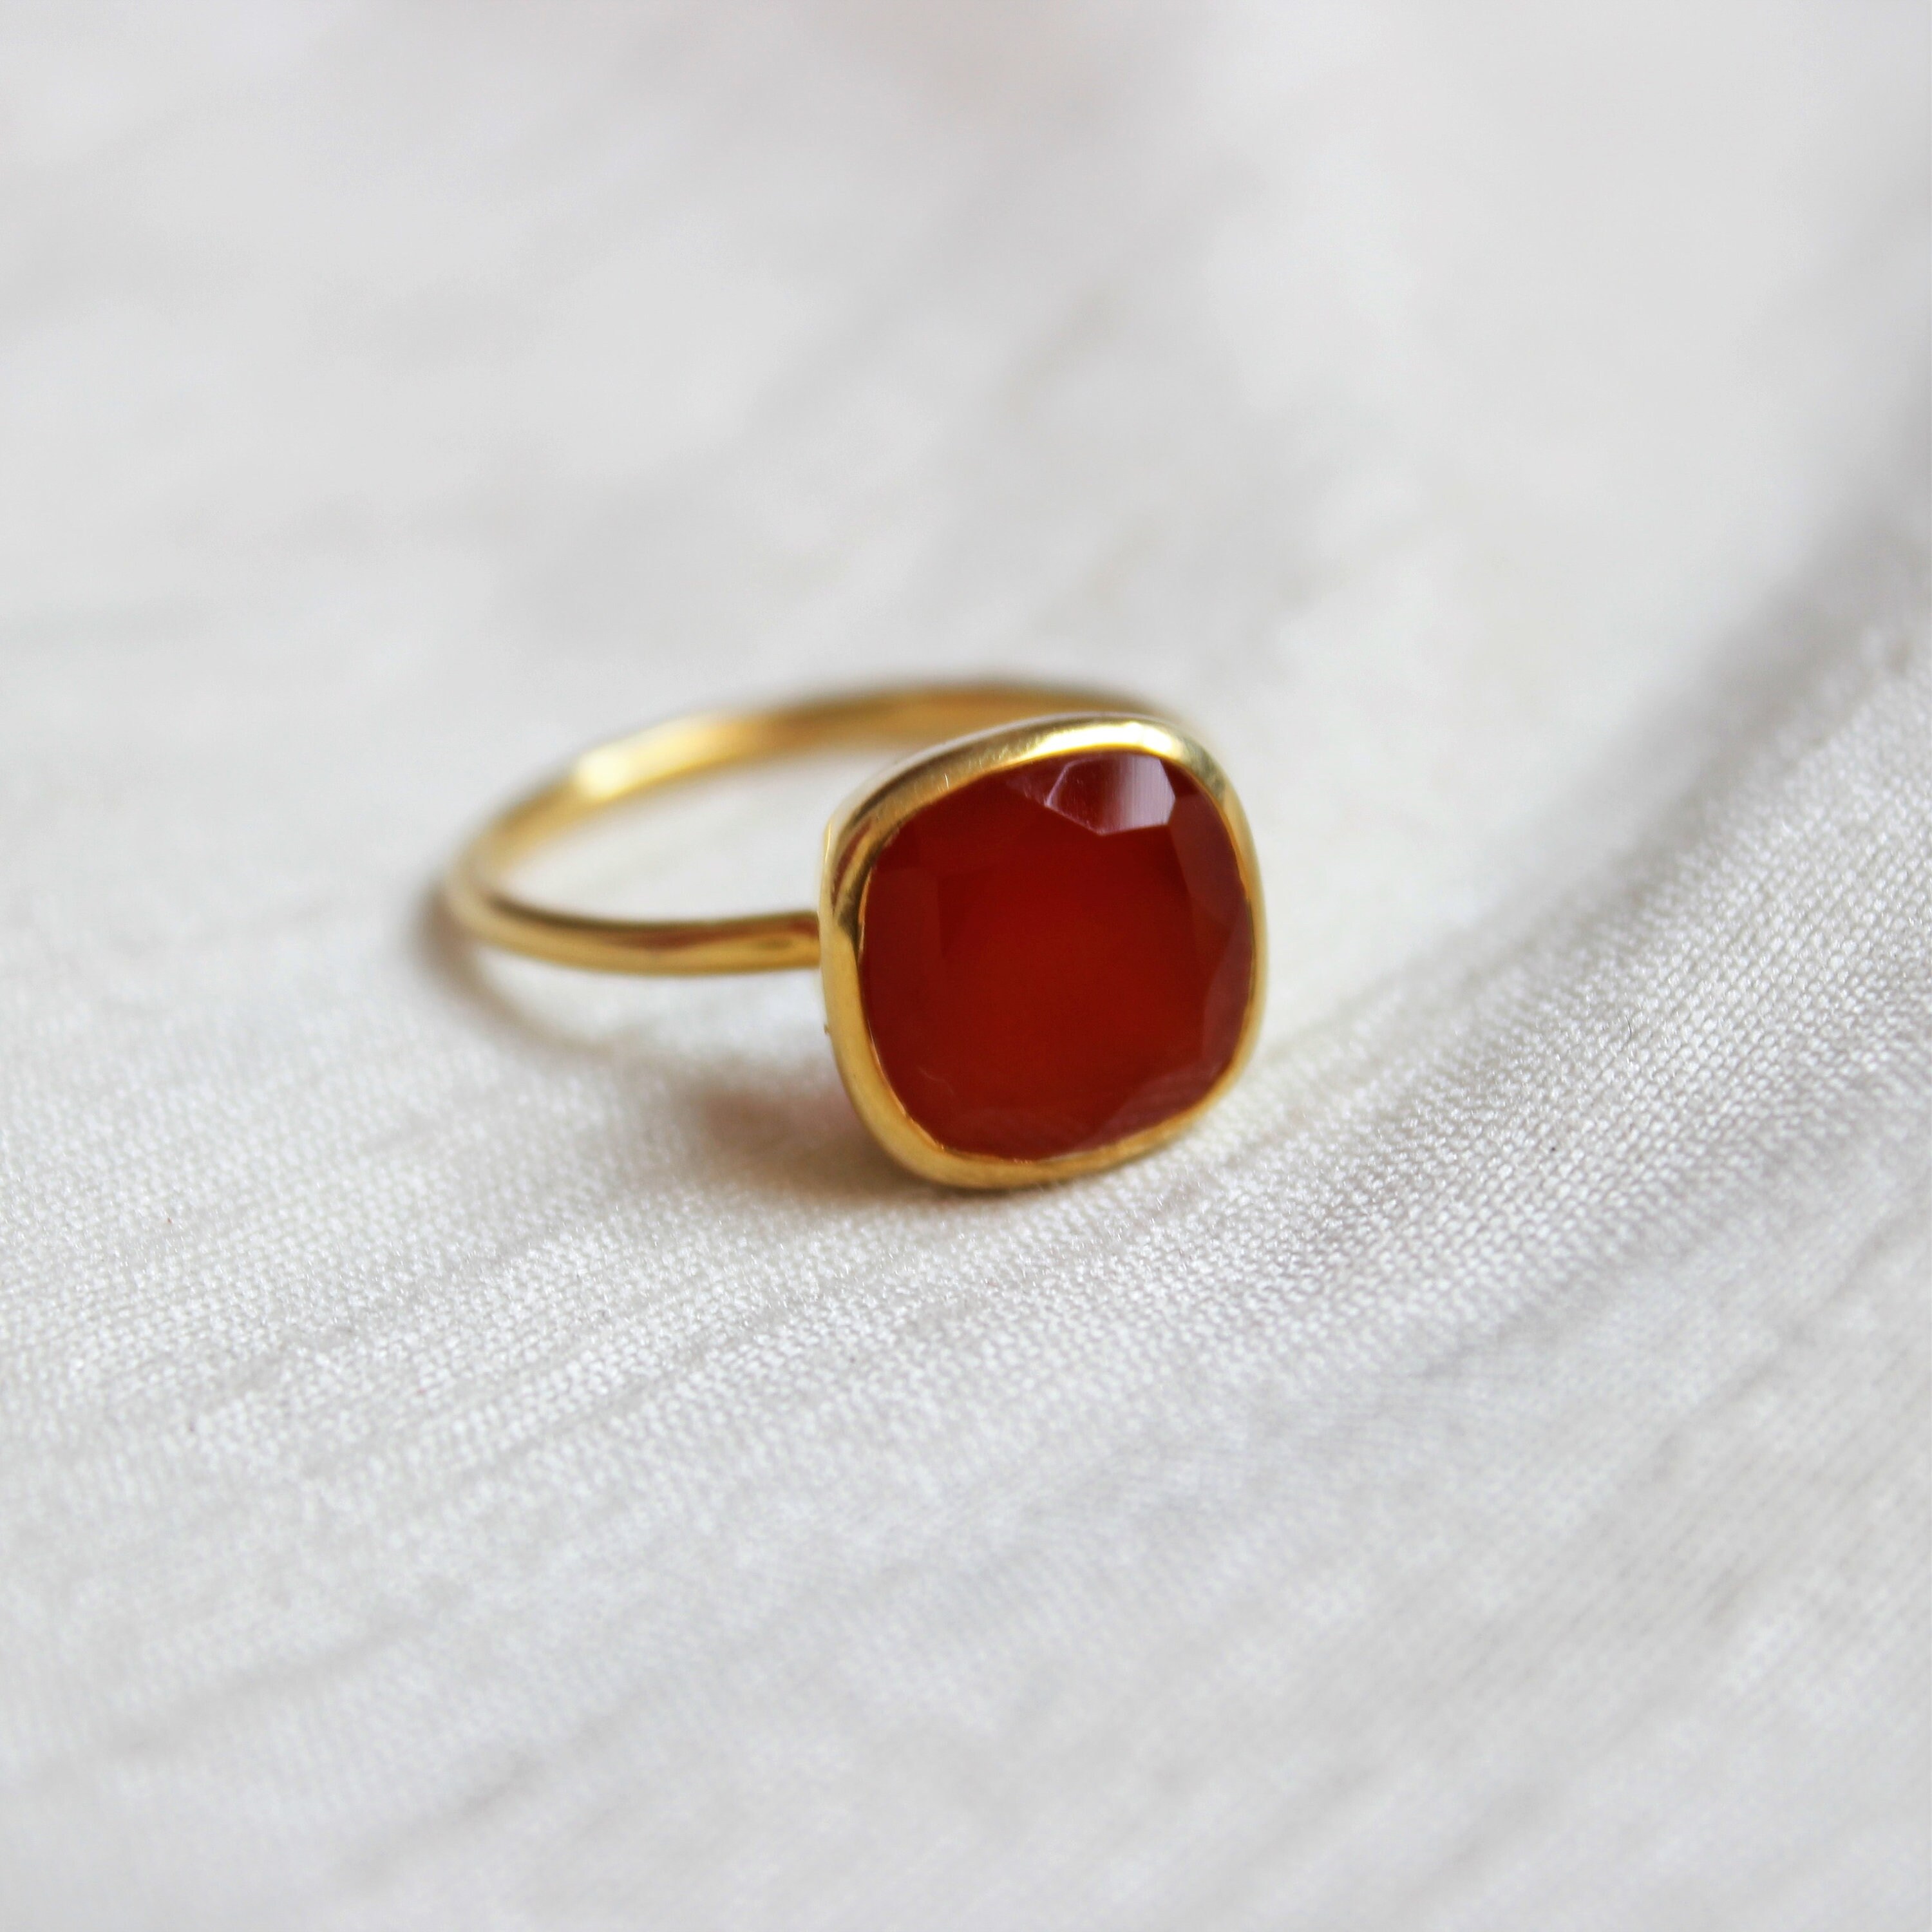 Natural Carnelian Ring 925 Sterling Silver Ring Gold Plated | Etsy